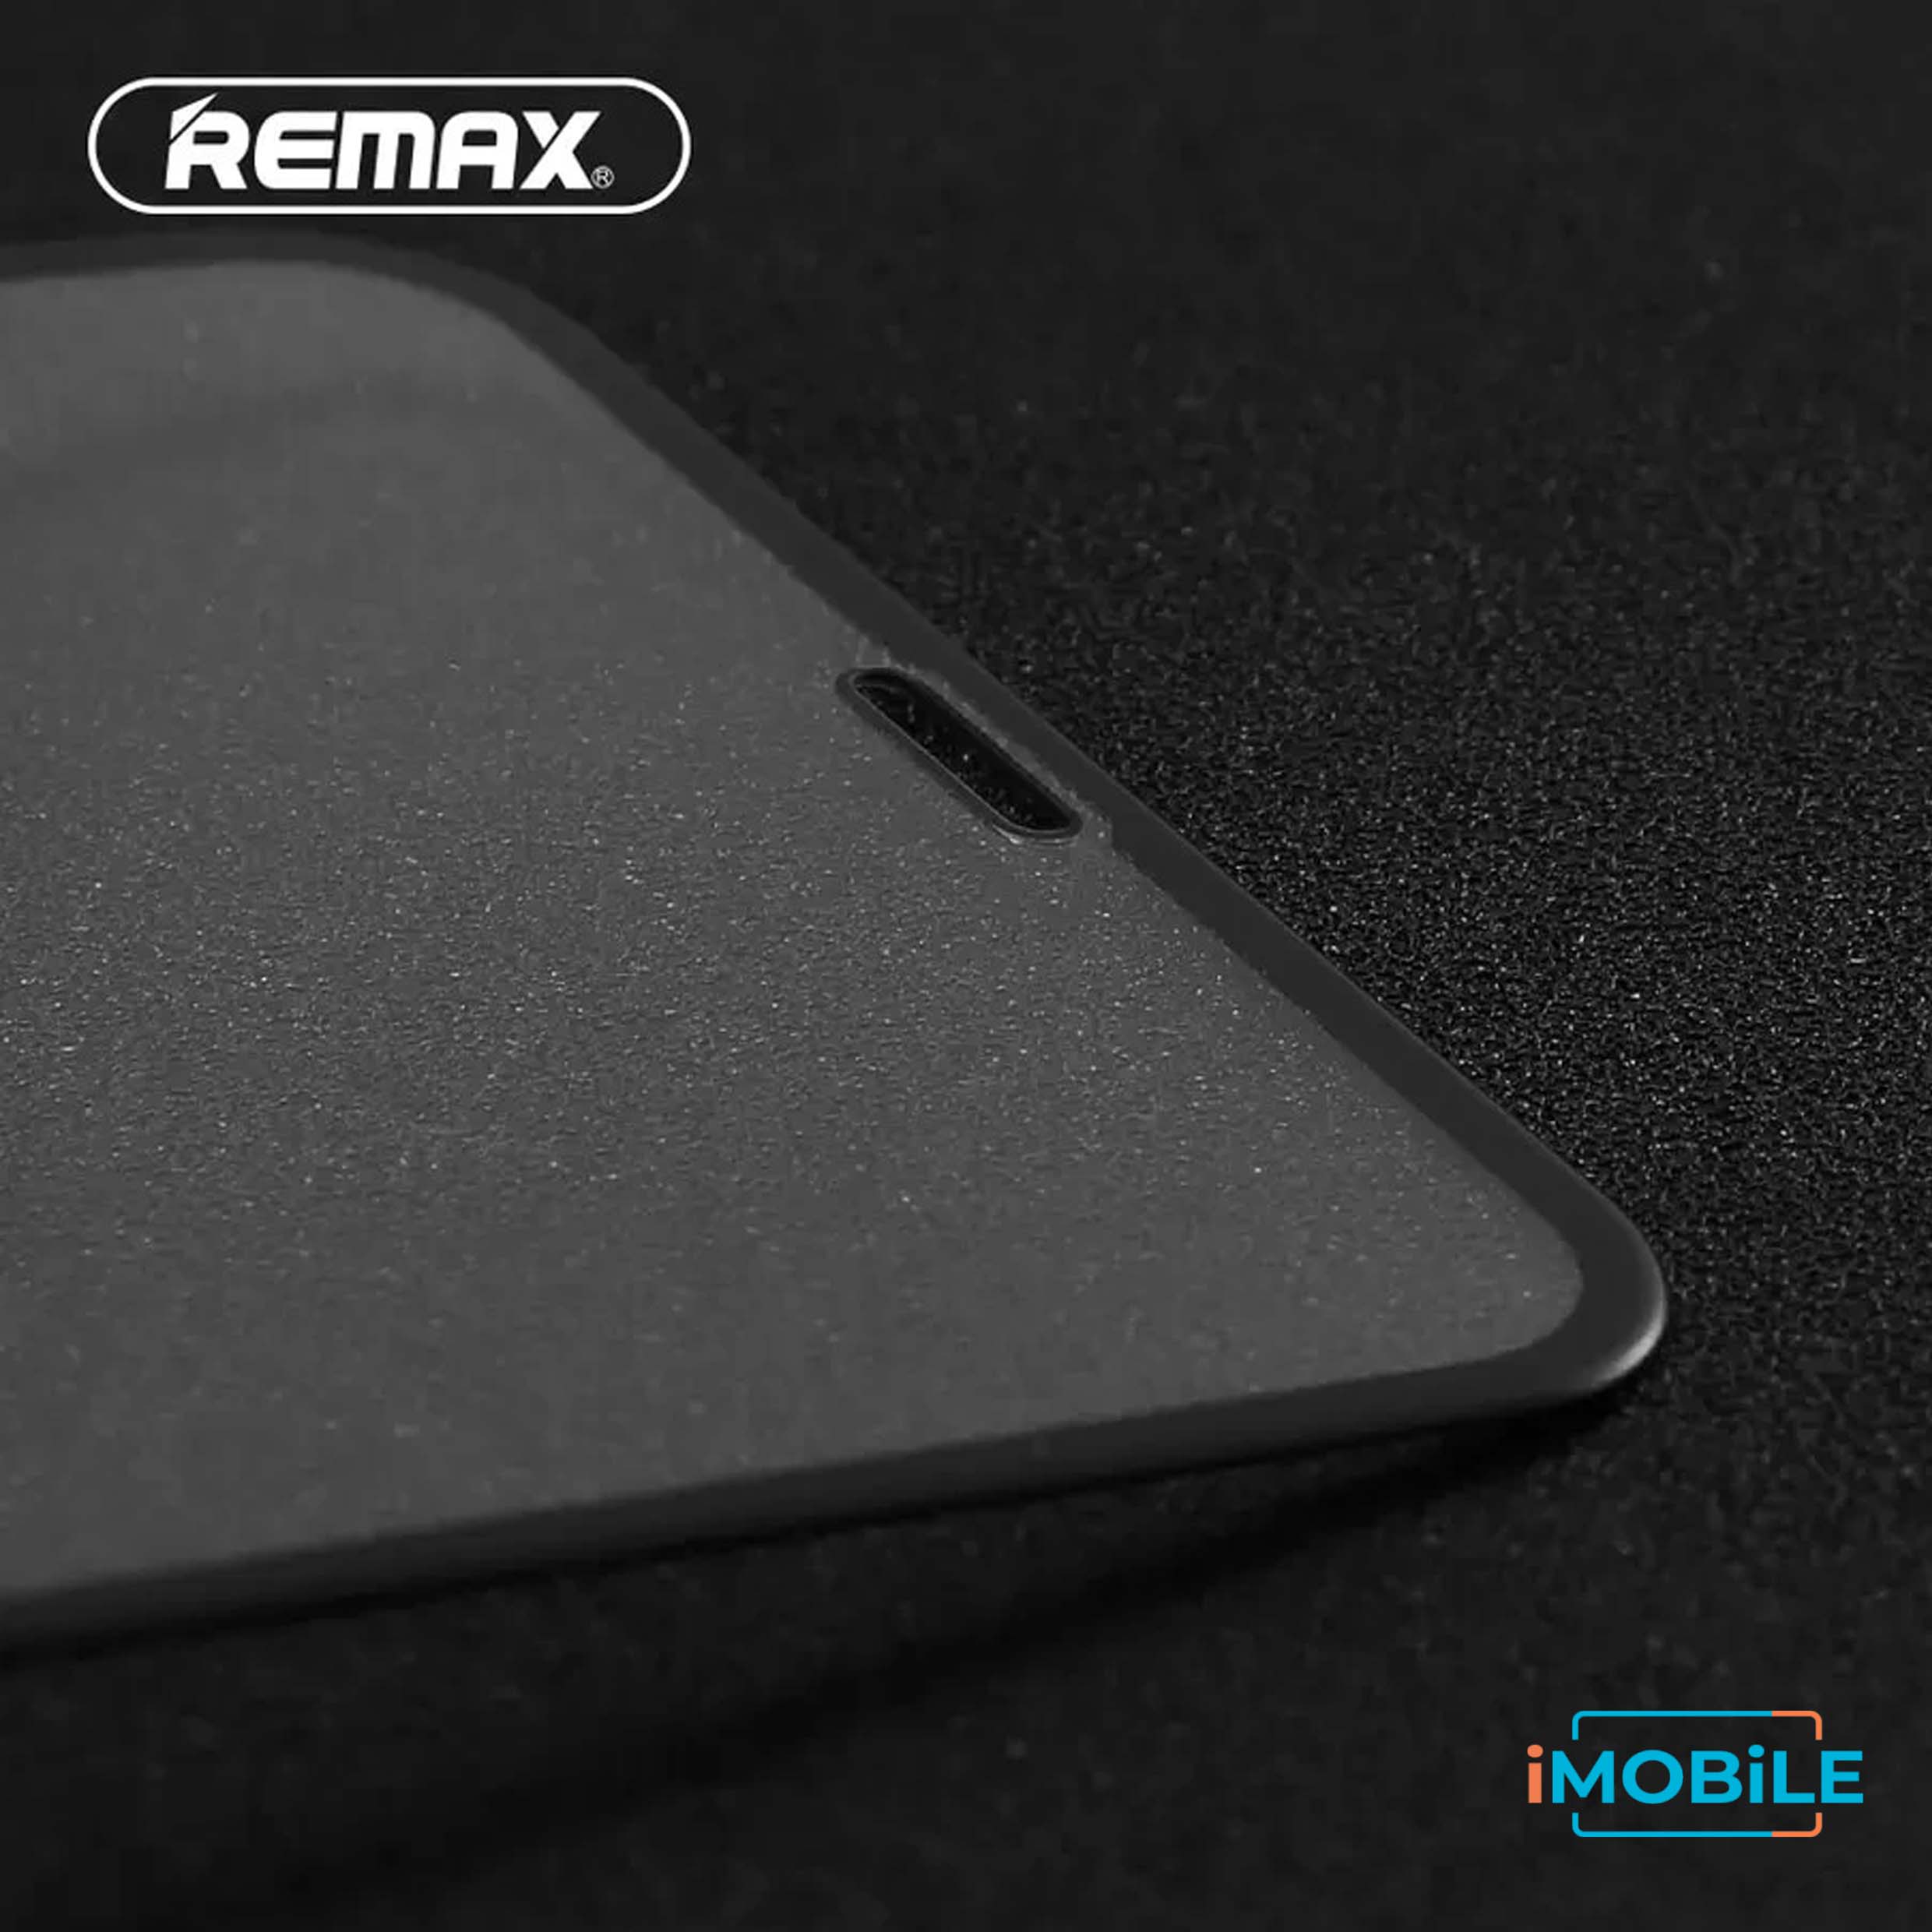 Remax 2.5D Tempered Glass with Envelope Pack, iPhone 12 Pro Max